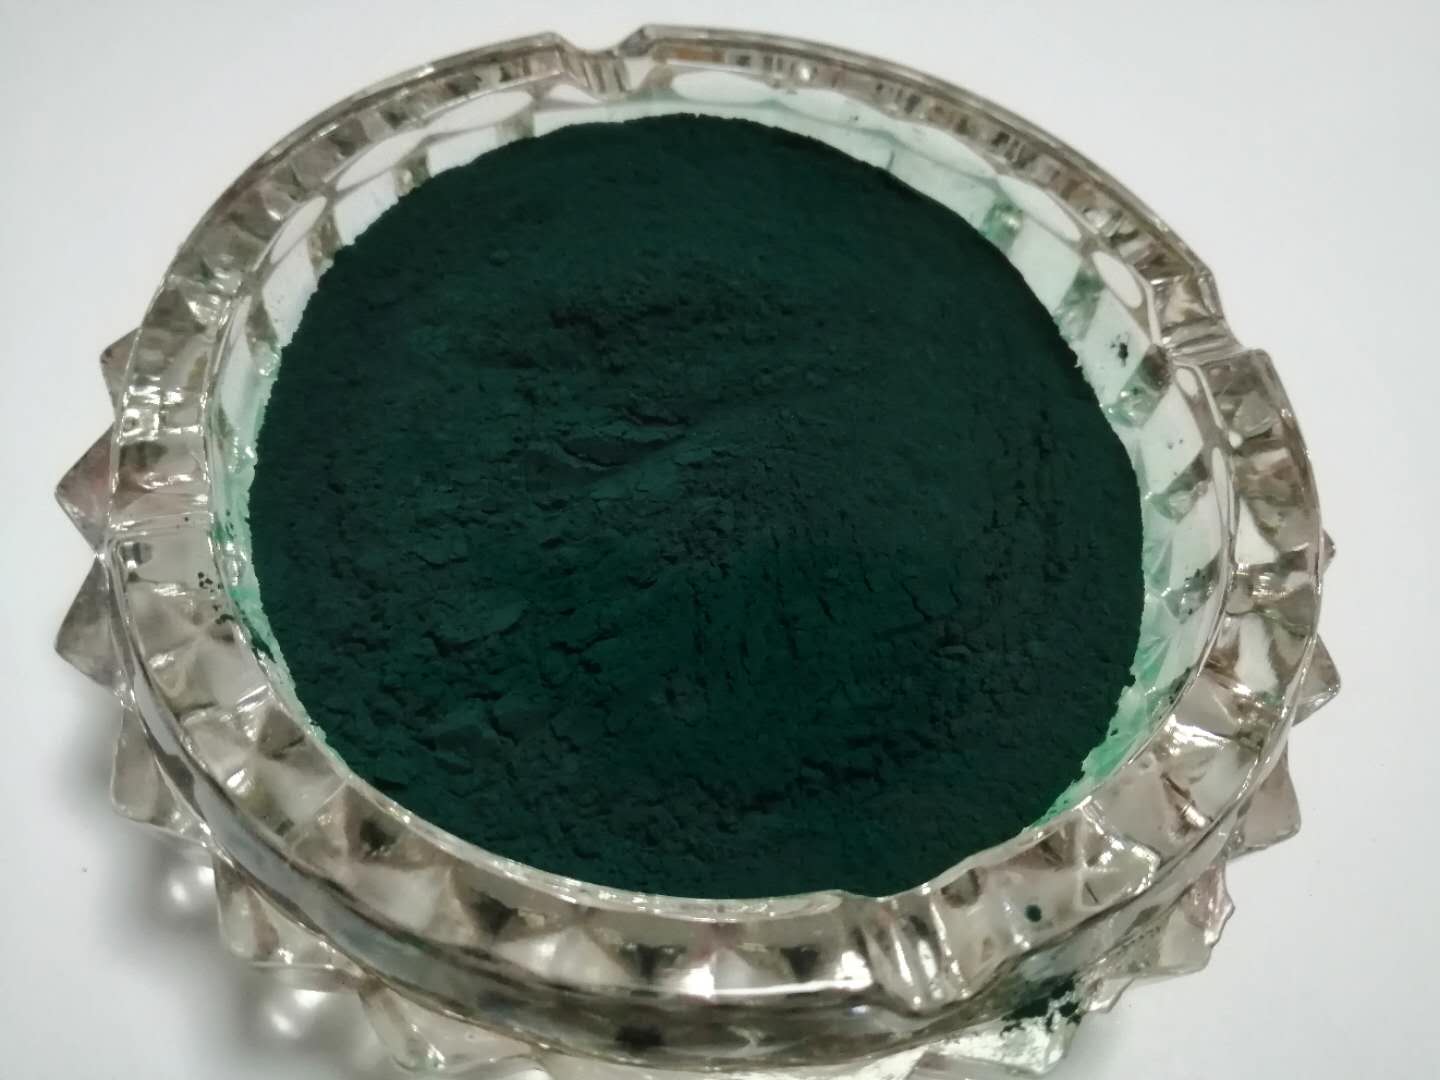 Pigment Green 36 Excellent Light Fastness And Heat Resistance for Cosmetics And Beverage Packaging Products